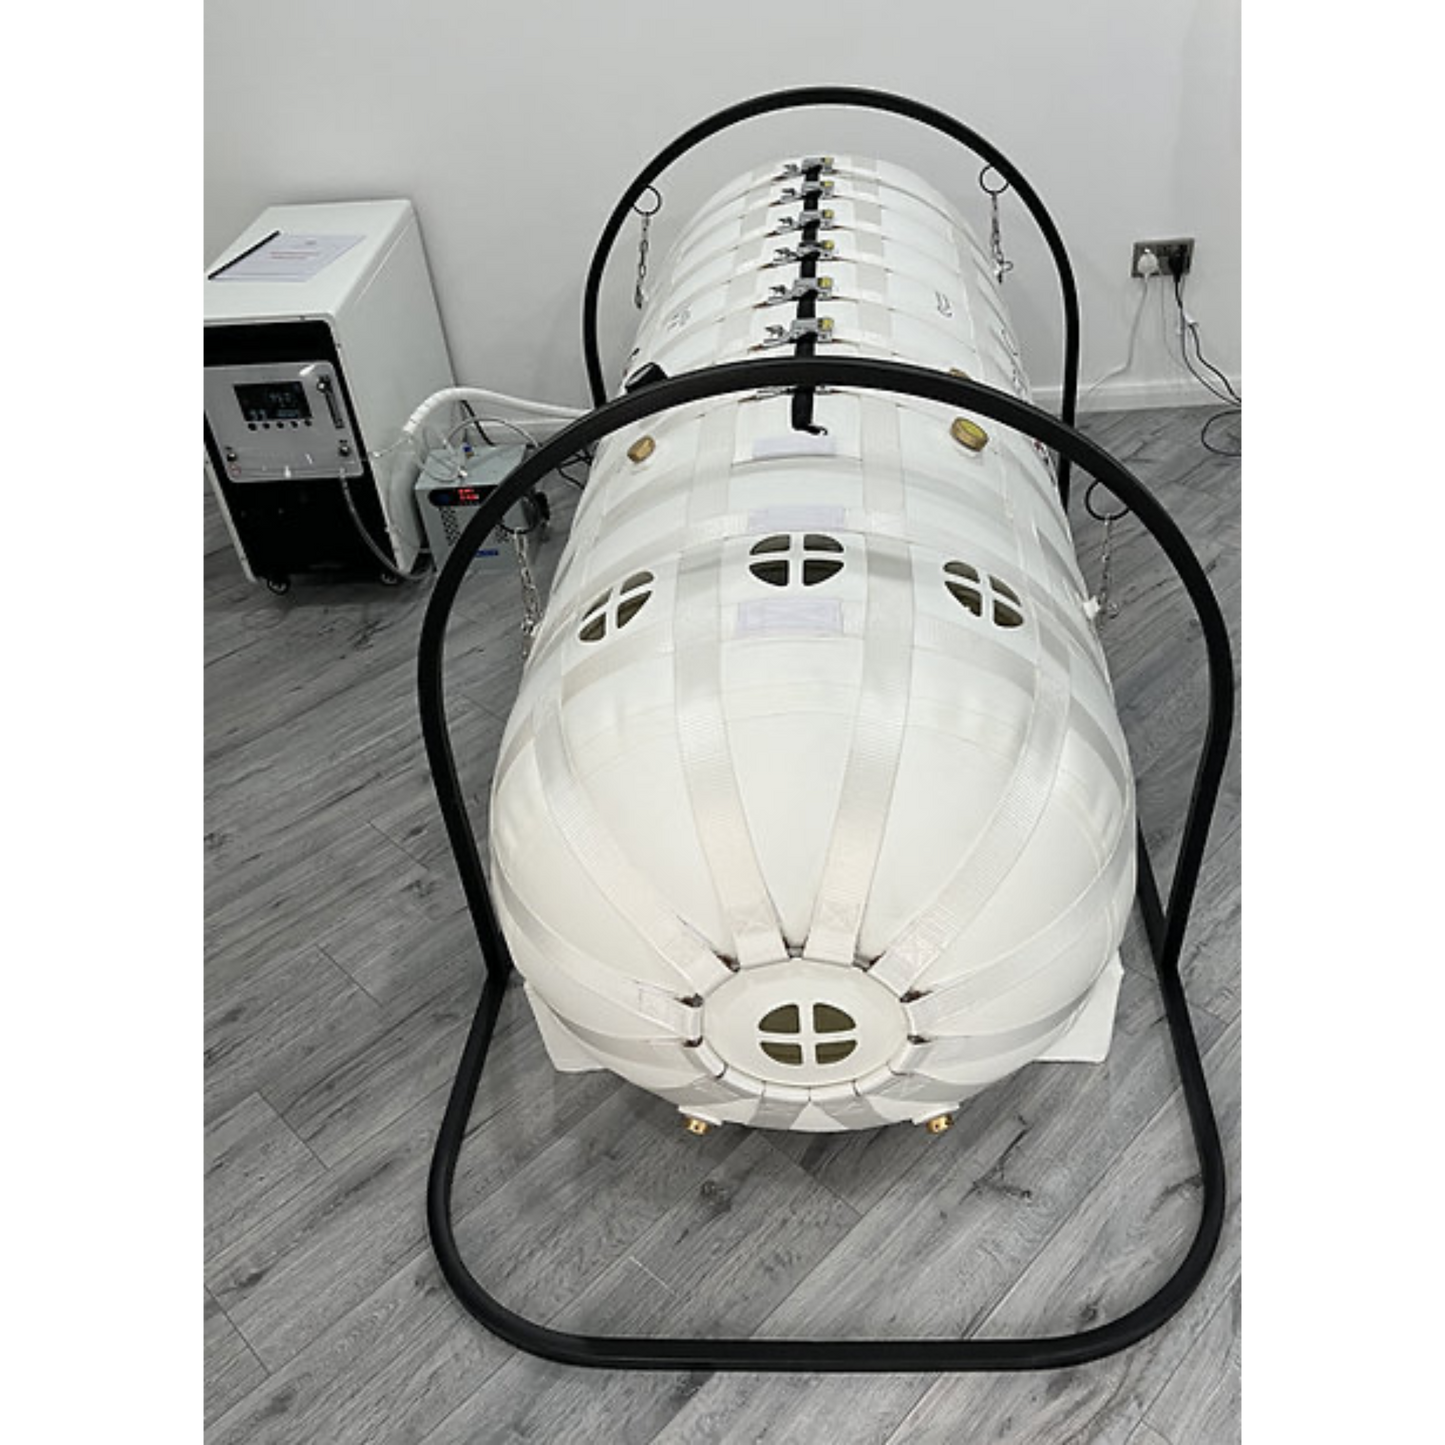 Hyperbaric Oxygen Chamber 2.0 ATA Pro - Double the Pressure of 1.5 ATA